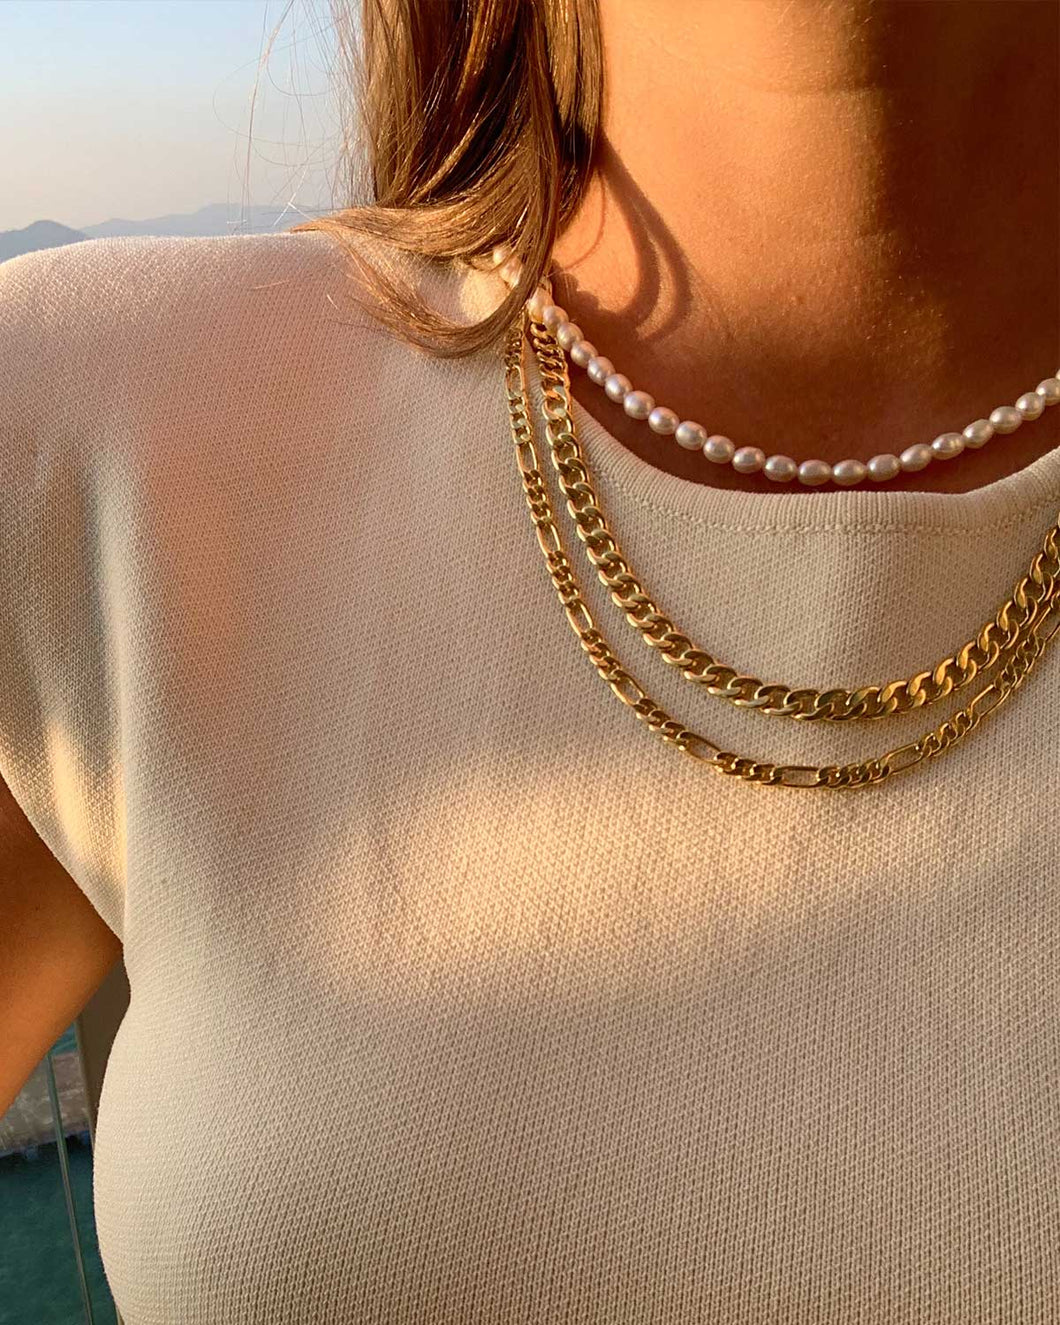 An elegant woman donning a white top and a gold chain necklace adorned with genuine freshwater pearls, adjustable in length.